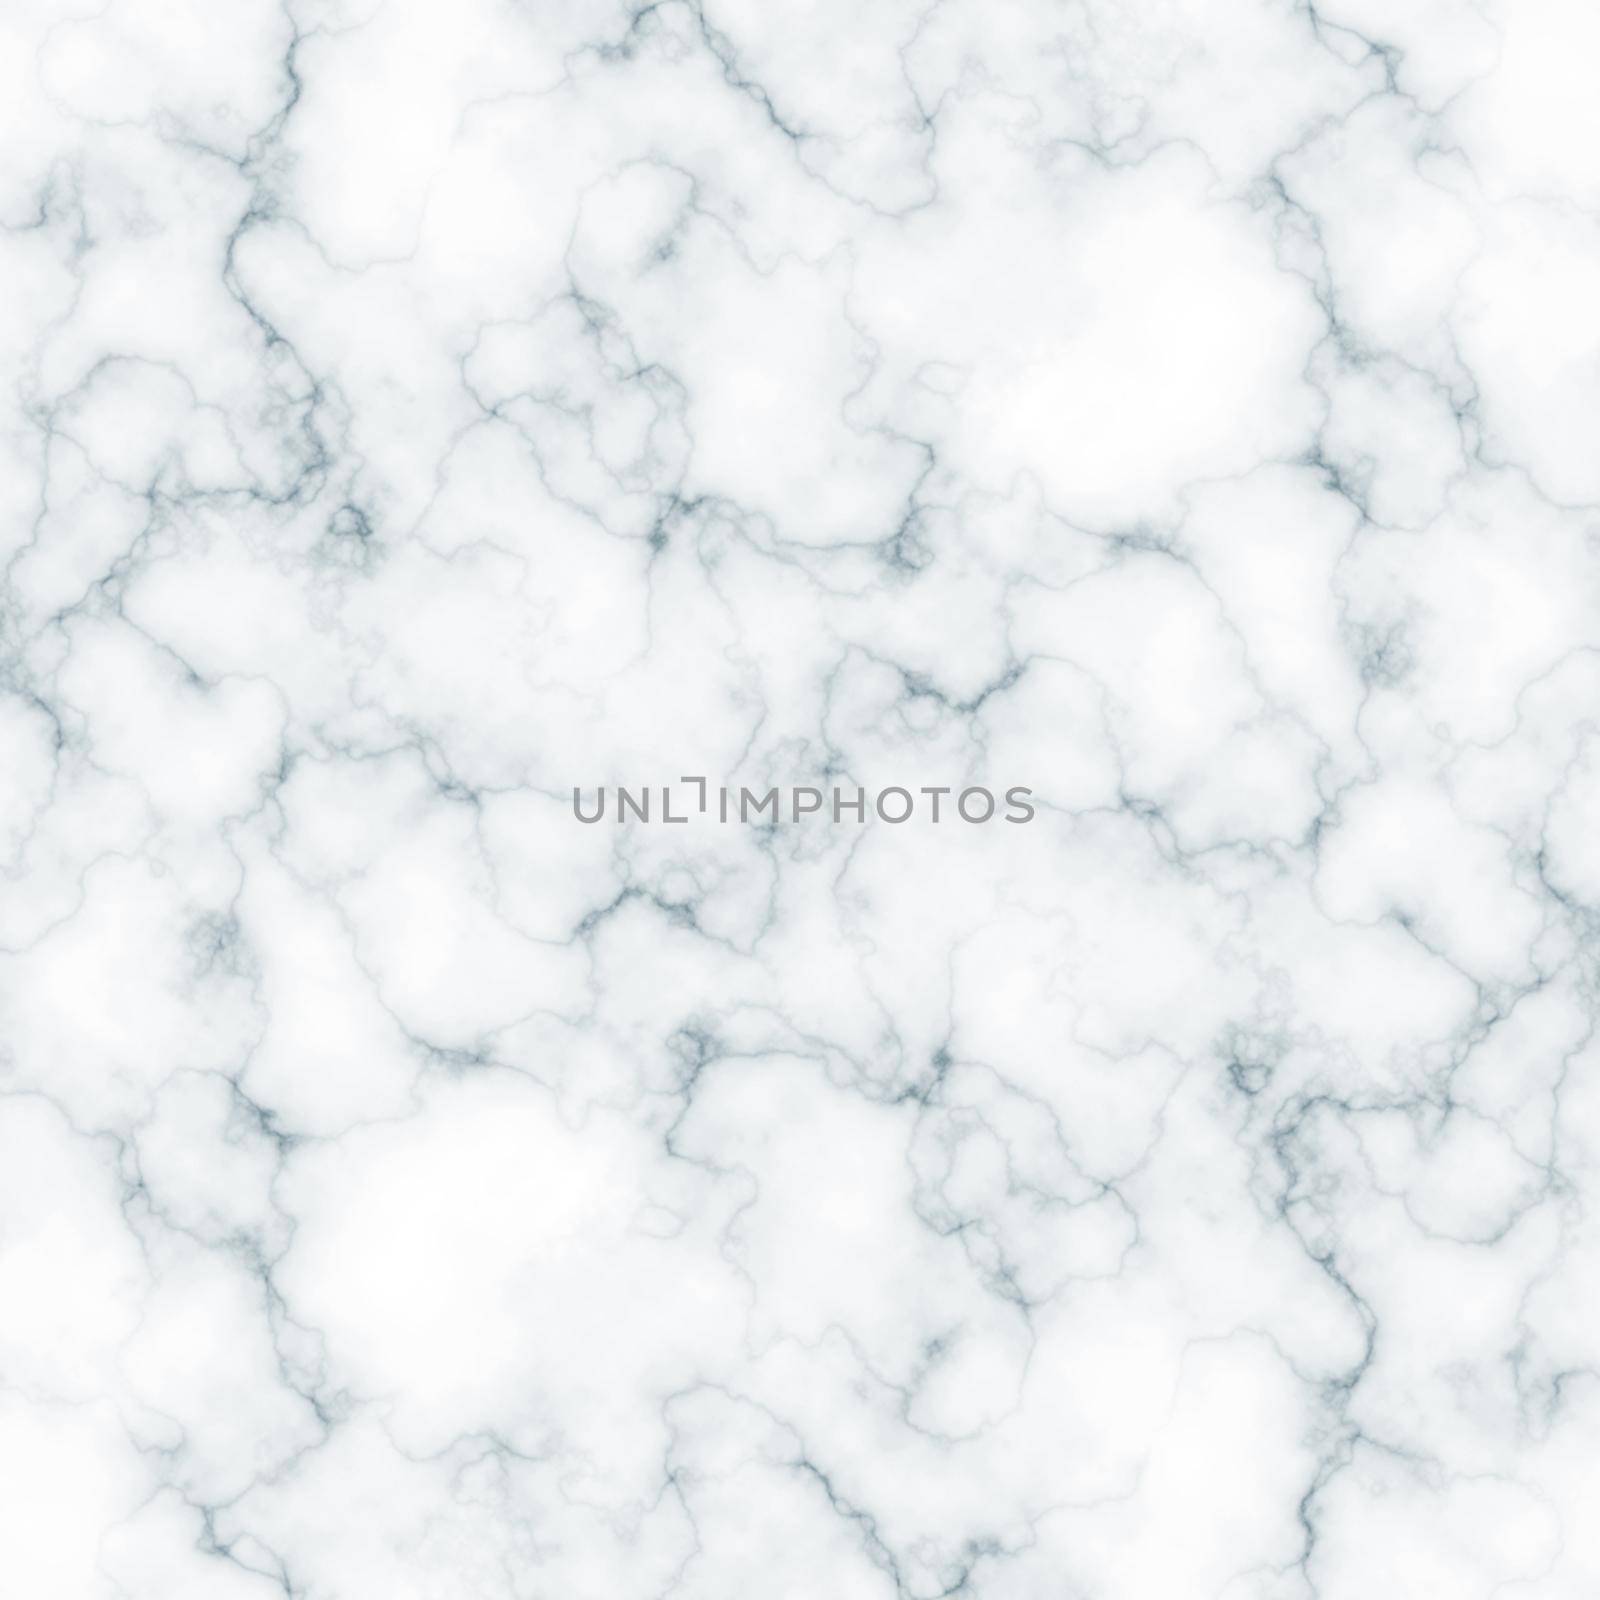 Marble texture abstract background EPS10 vector illustration graphic design.